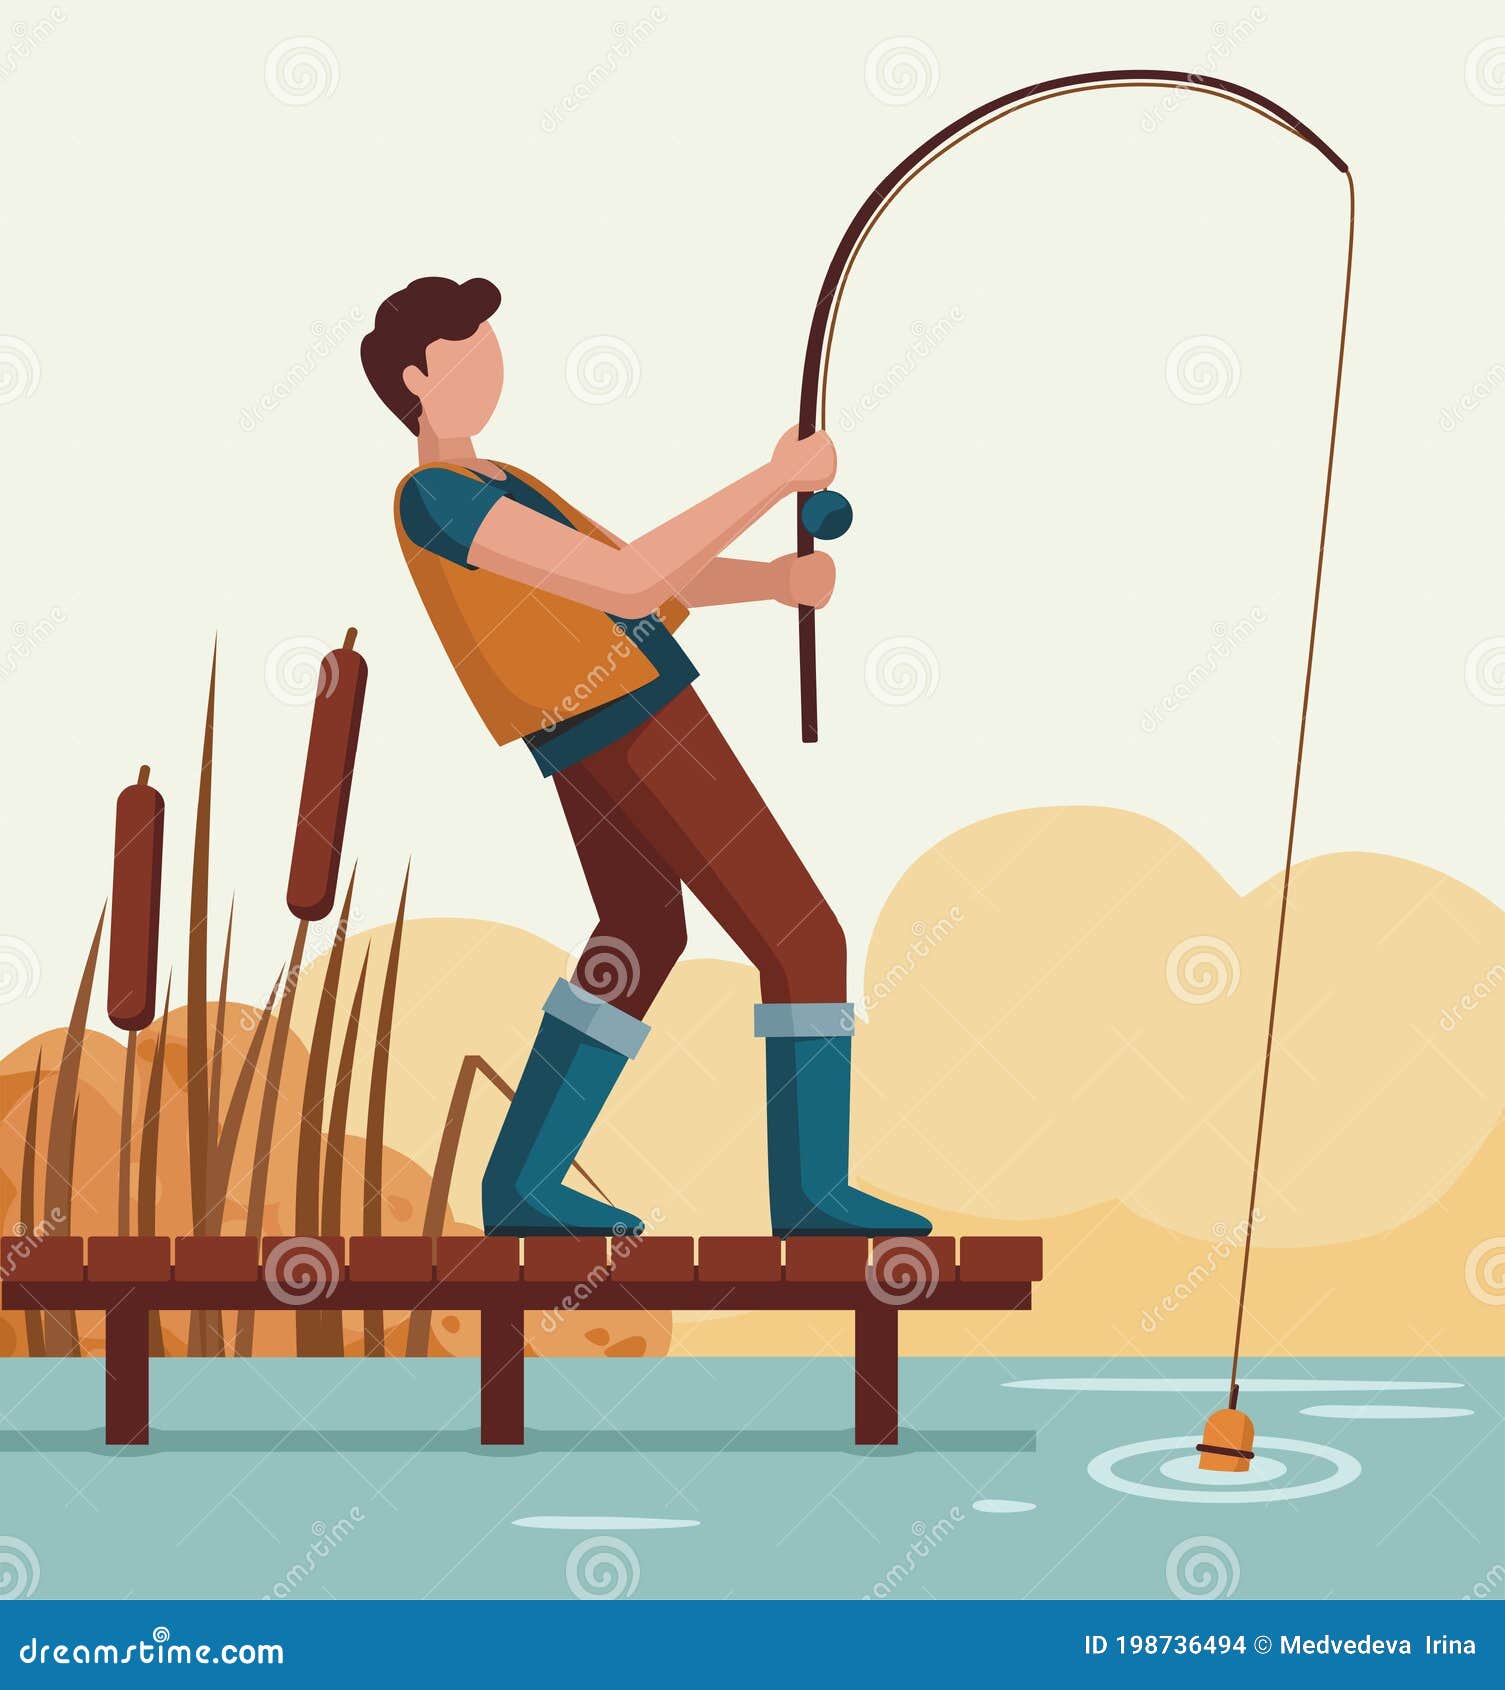 Man Fishing on a Lake on a Wooden Dock. Fisherman Stock Vector